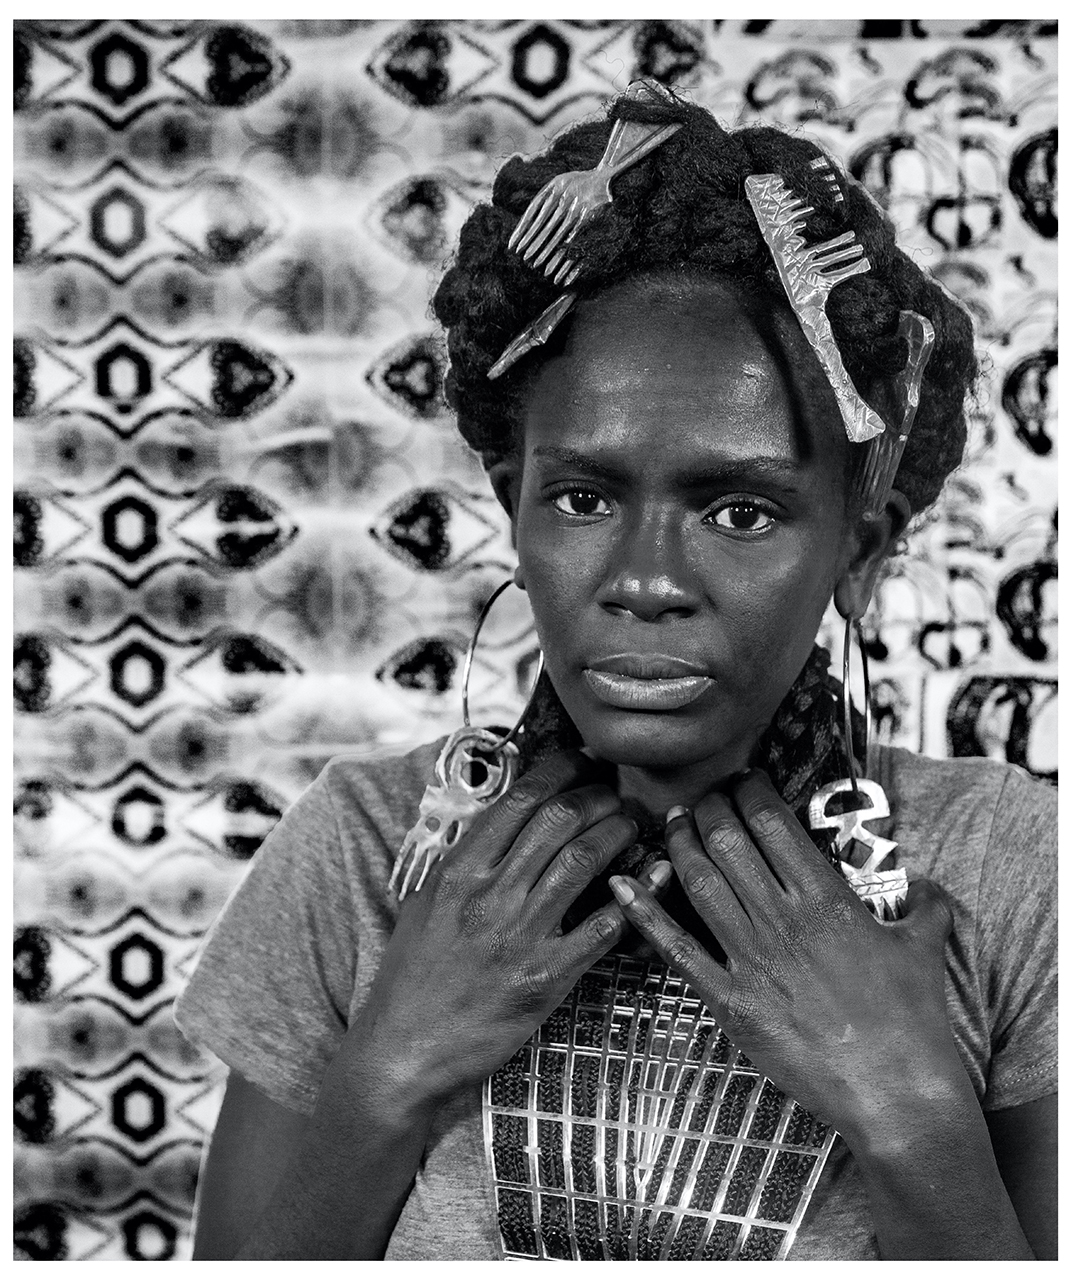 Black and white photograph of a black woman with long, braided hair which comes around her neck to look like a necklace. She is holding both hands to her neck and is also wearing large, comb-shaped, hair accessories and hoop earrings. She is looking directly at the camera with a serious expression and stands in front of a patterned background.